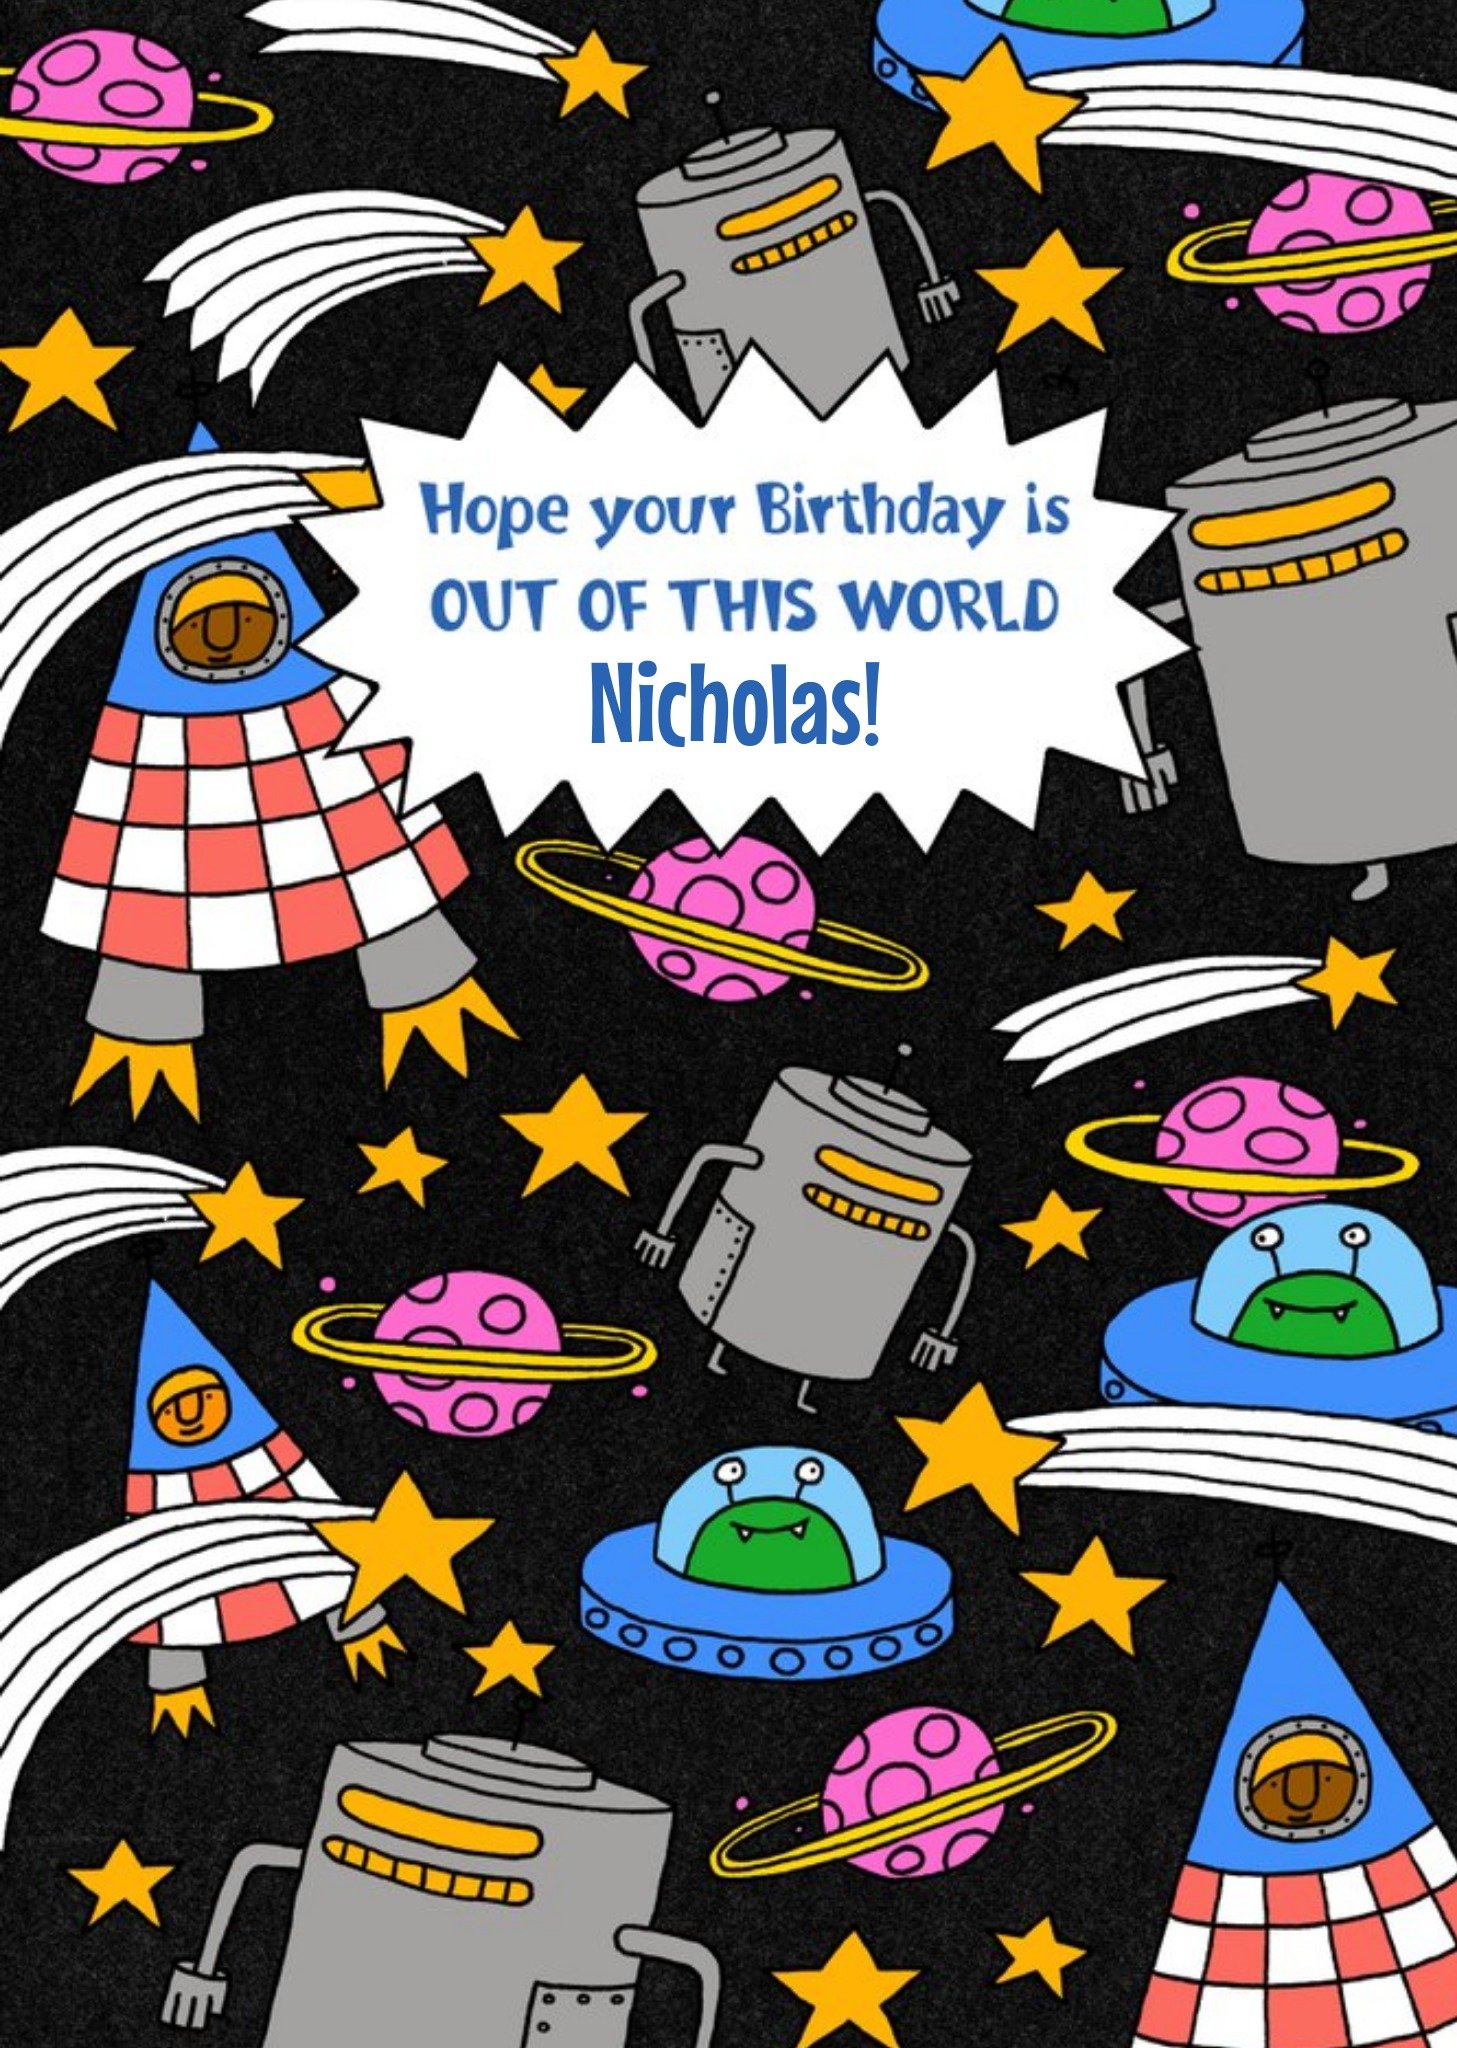 Moonpig Spaceships Space Astronauts Aliens Out Of This World Birthday Card, Large